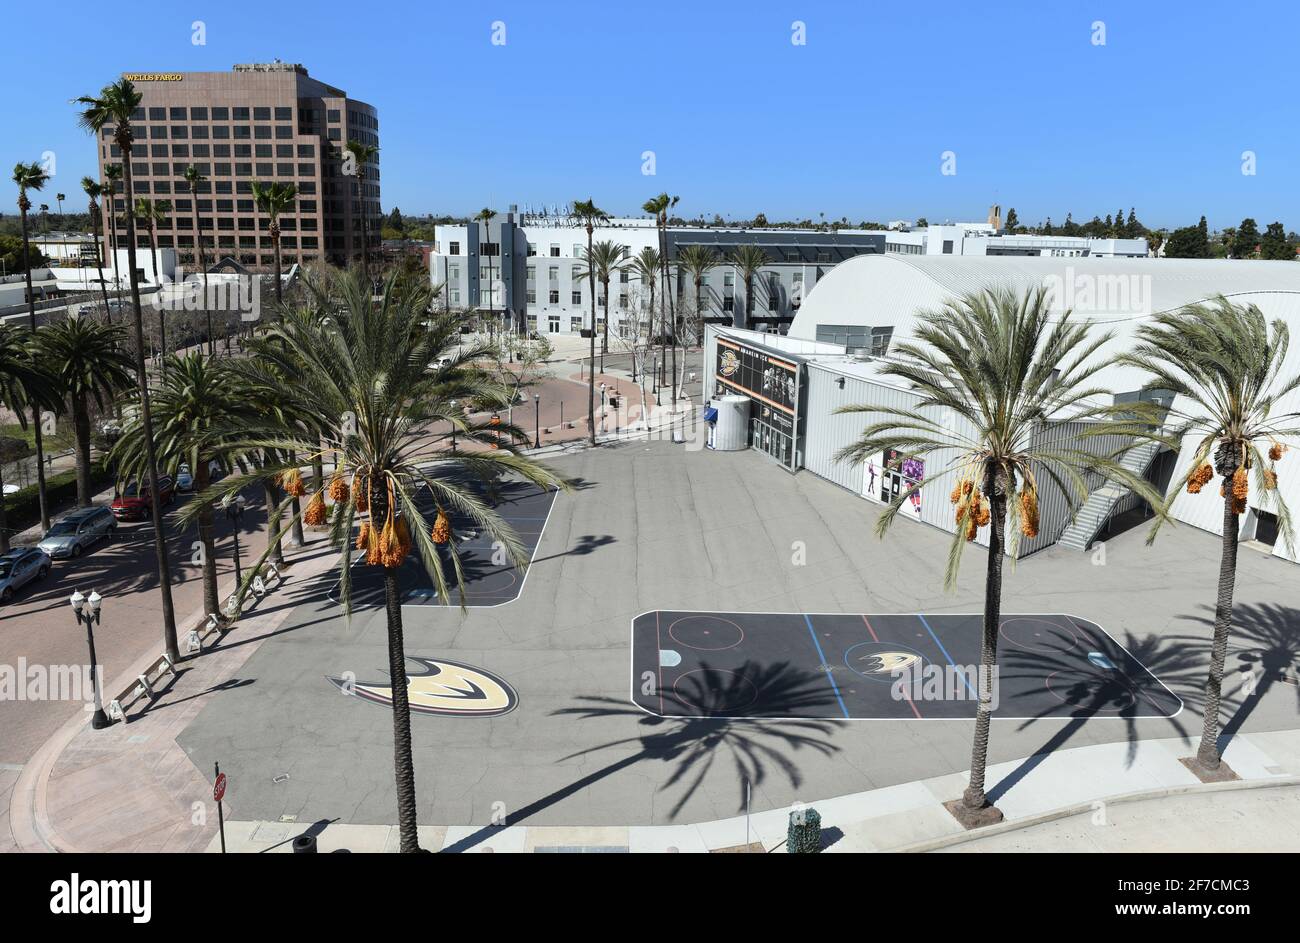 ANAHEIM, CALIFORNIA - 31 MAR 2021: High angle view of Anaheim Ice, Harbor Lofts and Wells Fargo Building in the Ctr City area of Anaheim. Stock Photo